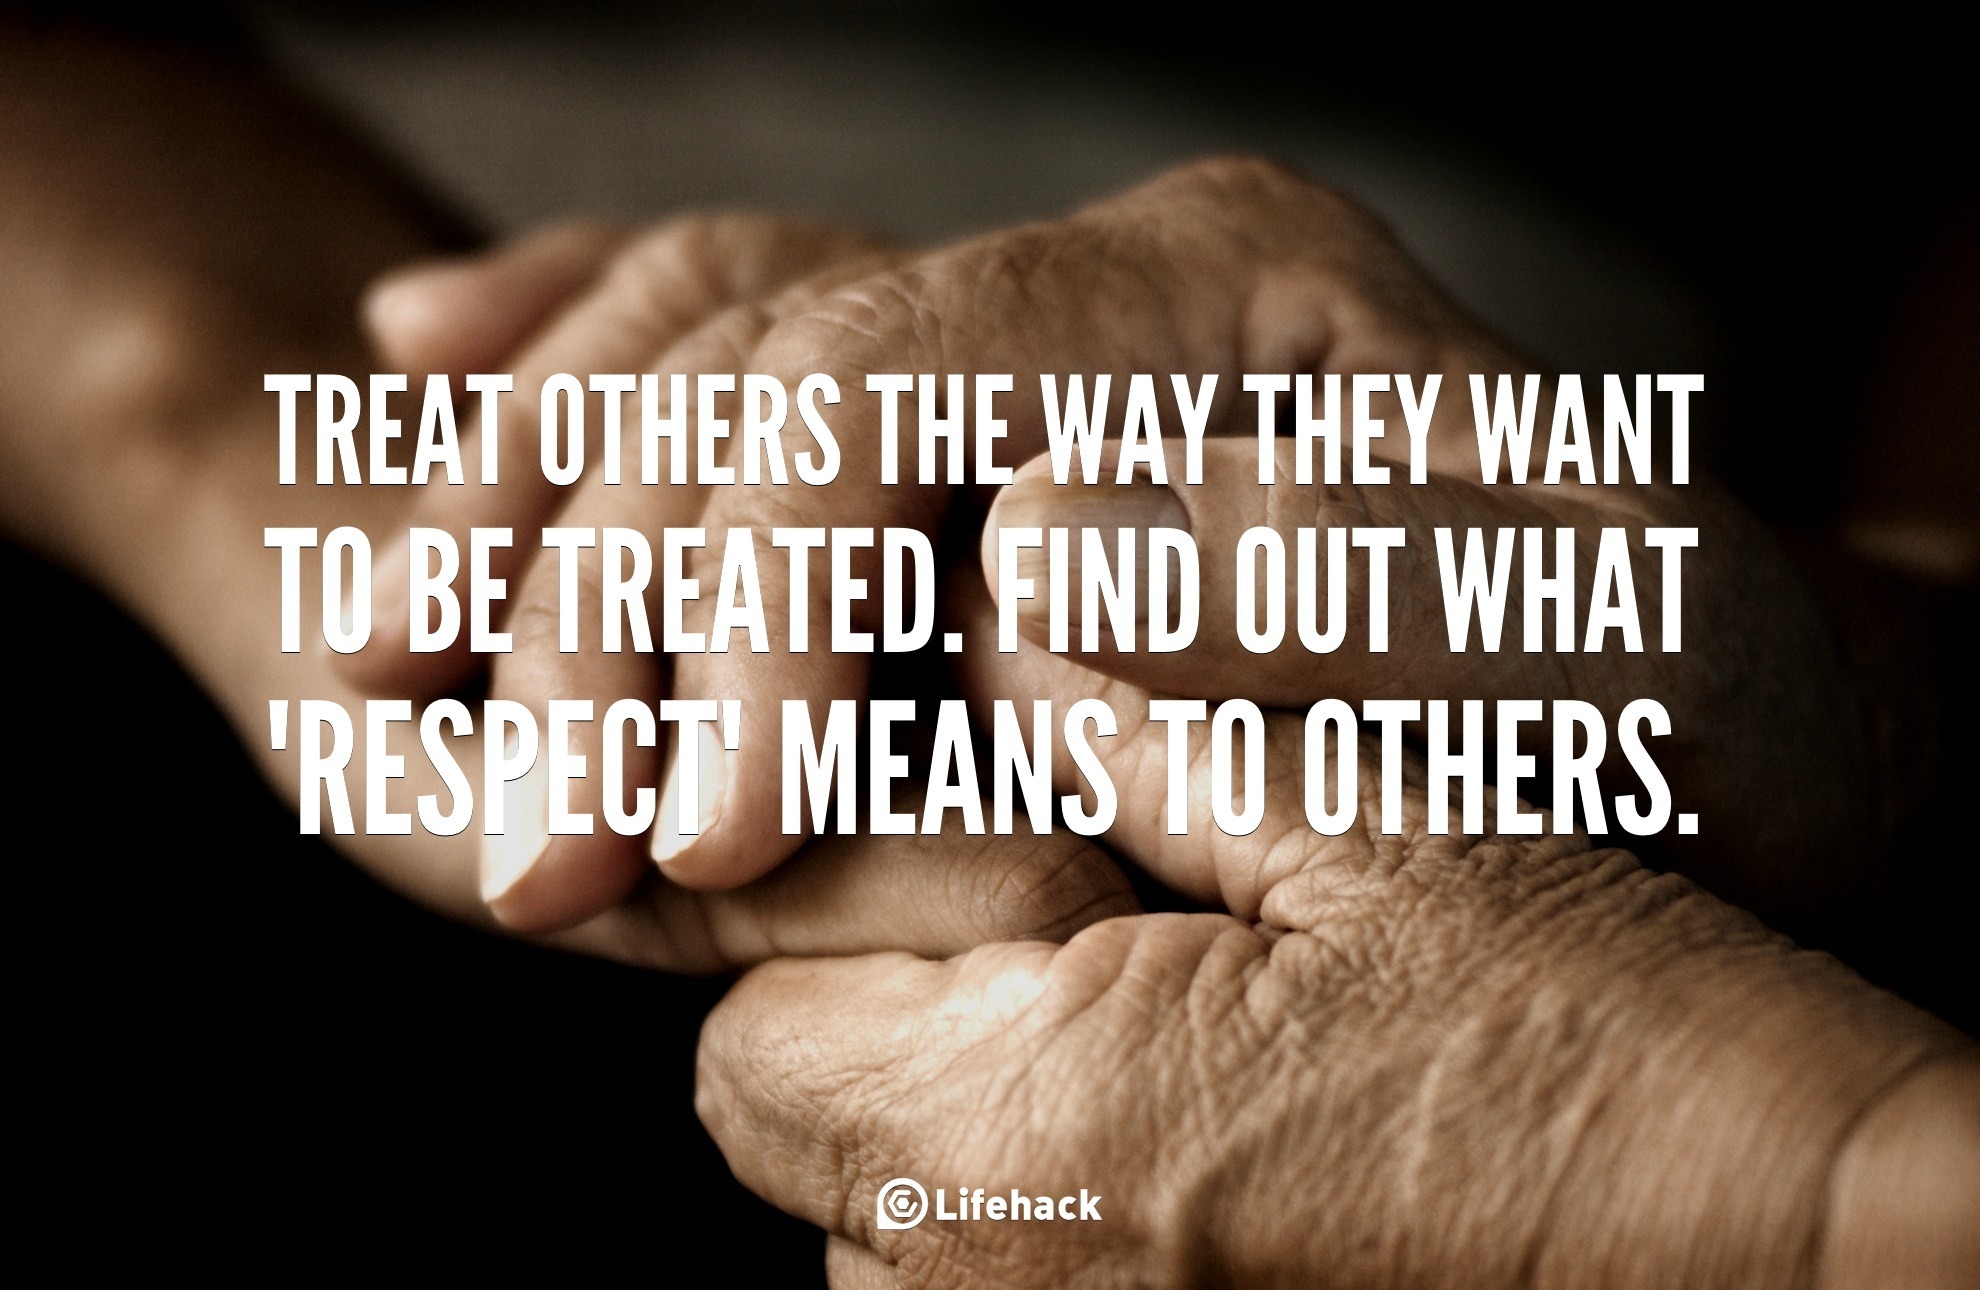 30sec Tip: Treat Others the Way They Want to be Treated